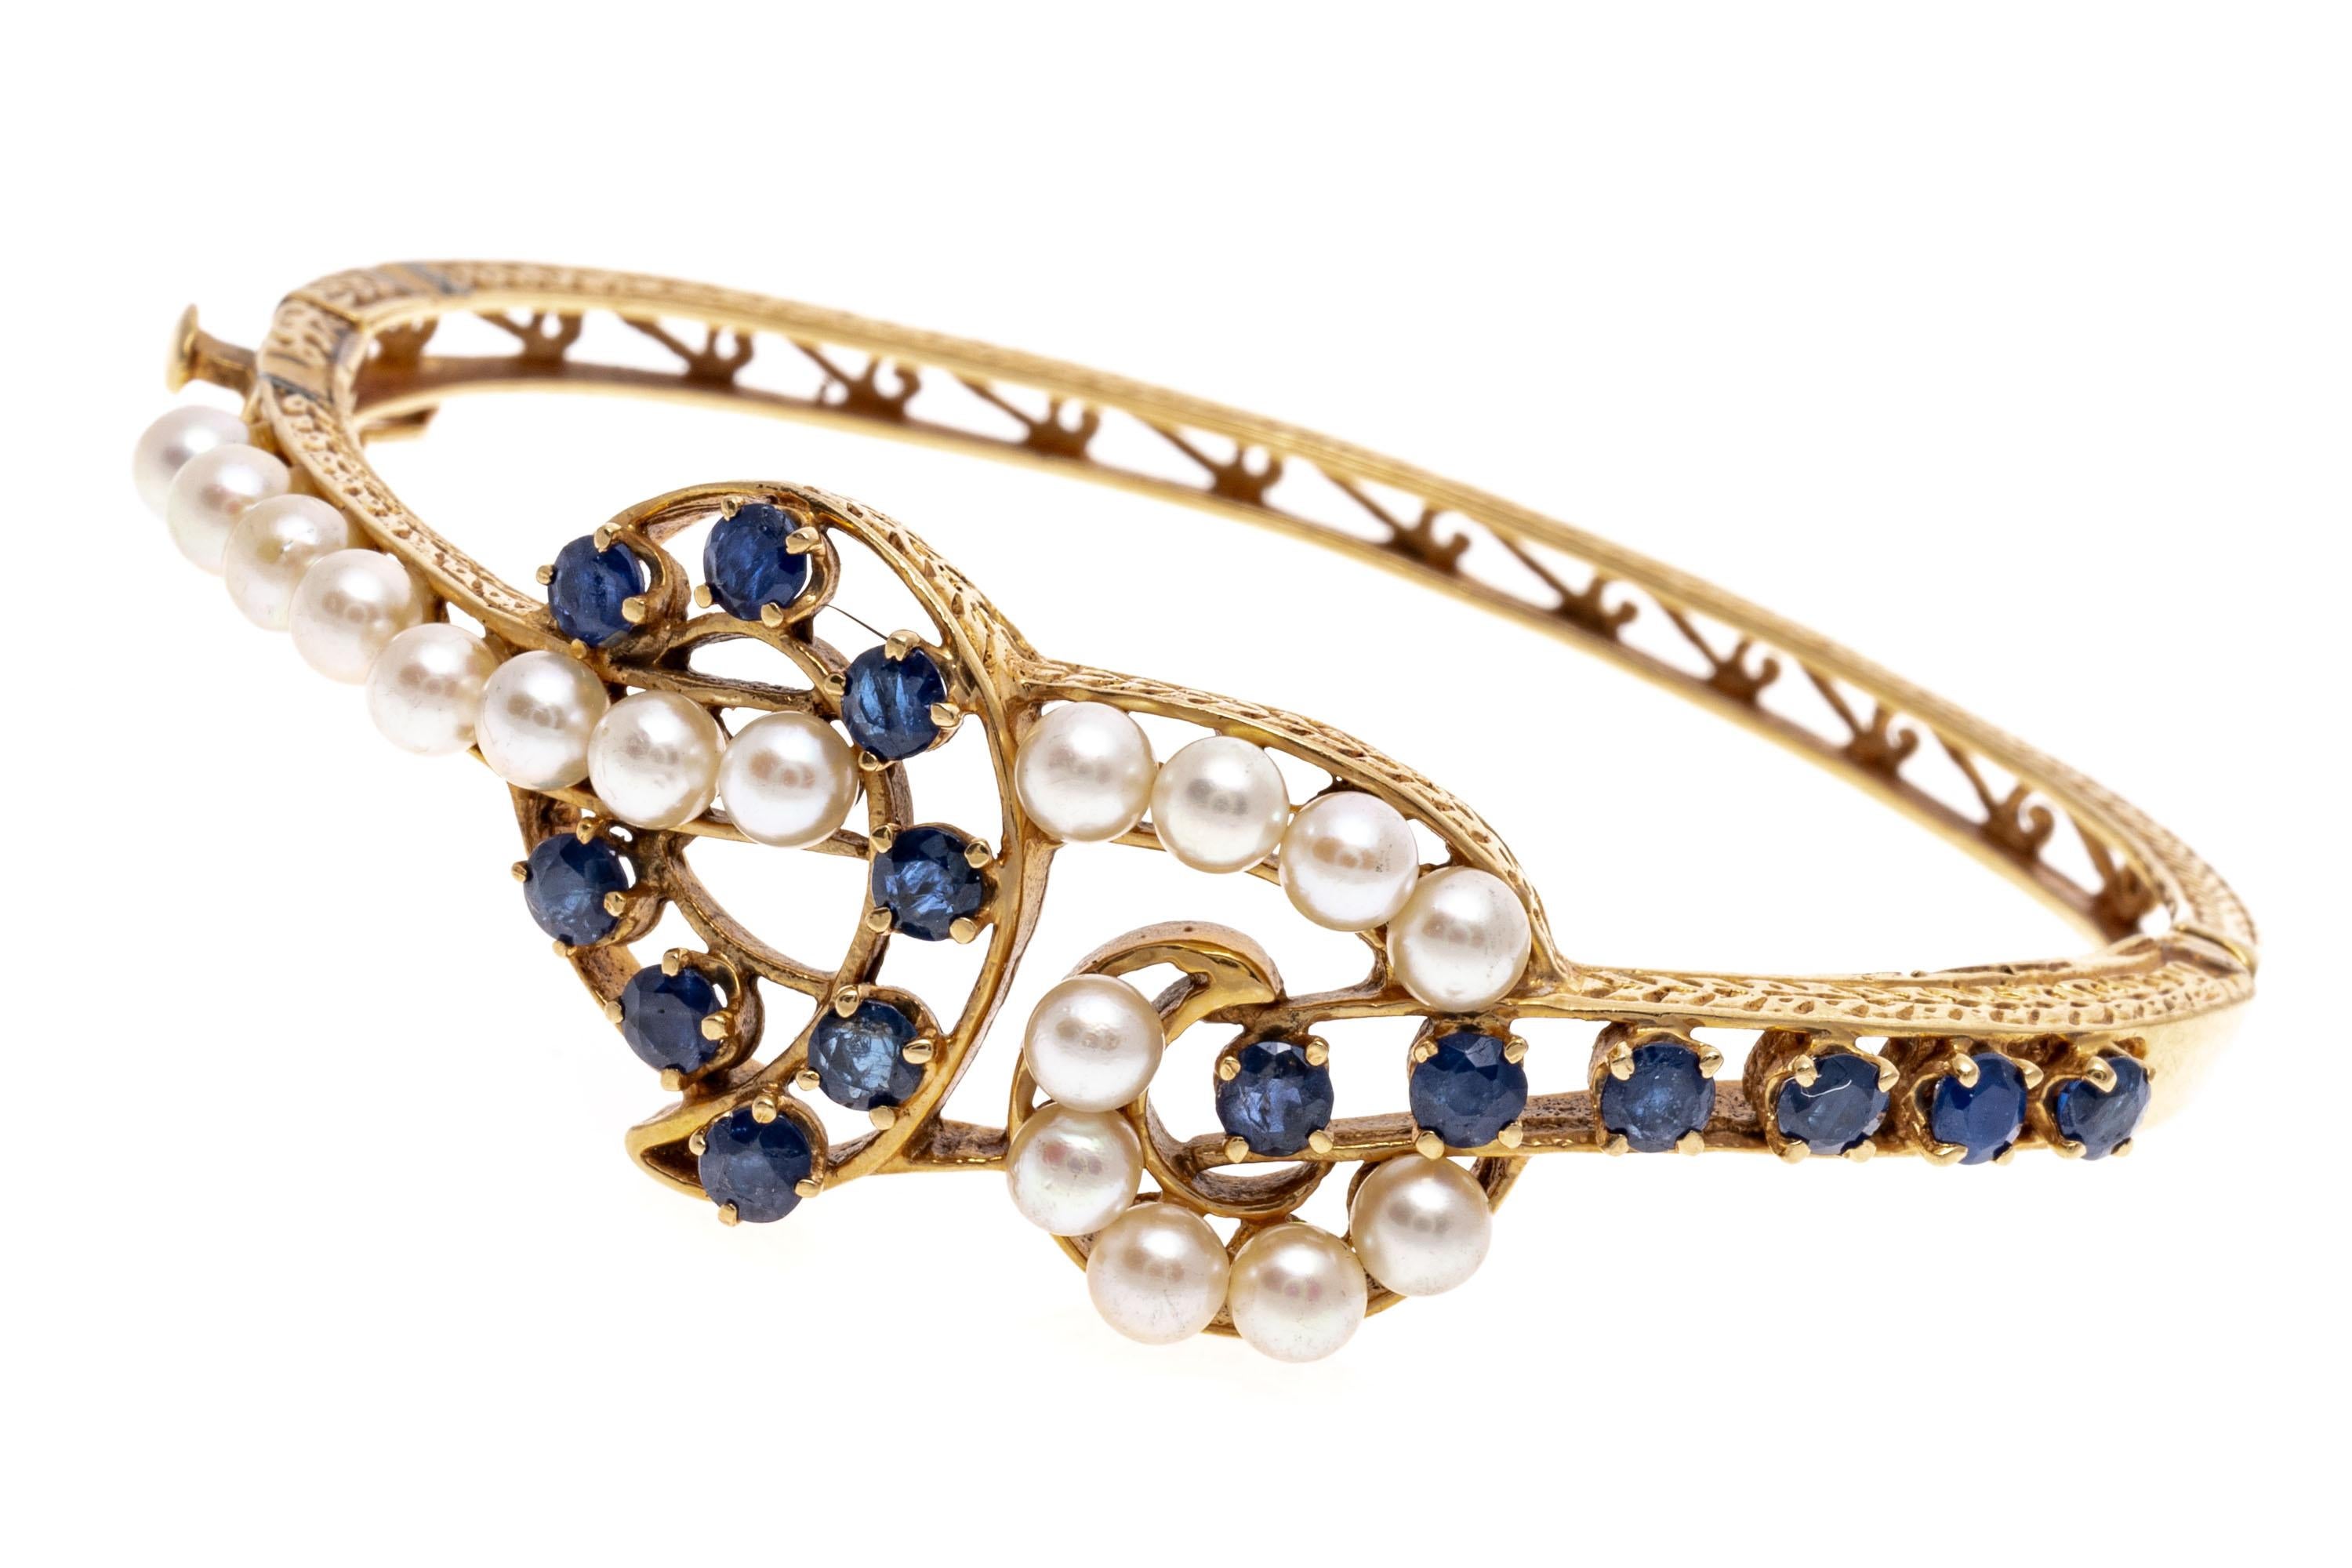 A graceful 14K yellow gold bangle bracelet with intertwining bands of bright white cultured pearls and indigo blue sapphires. The back of the band is accented is a delicate open filigree like design. Box style closure with safety latch for added